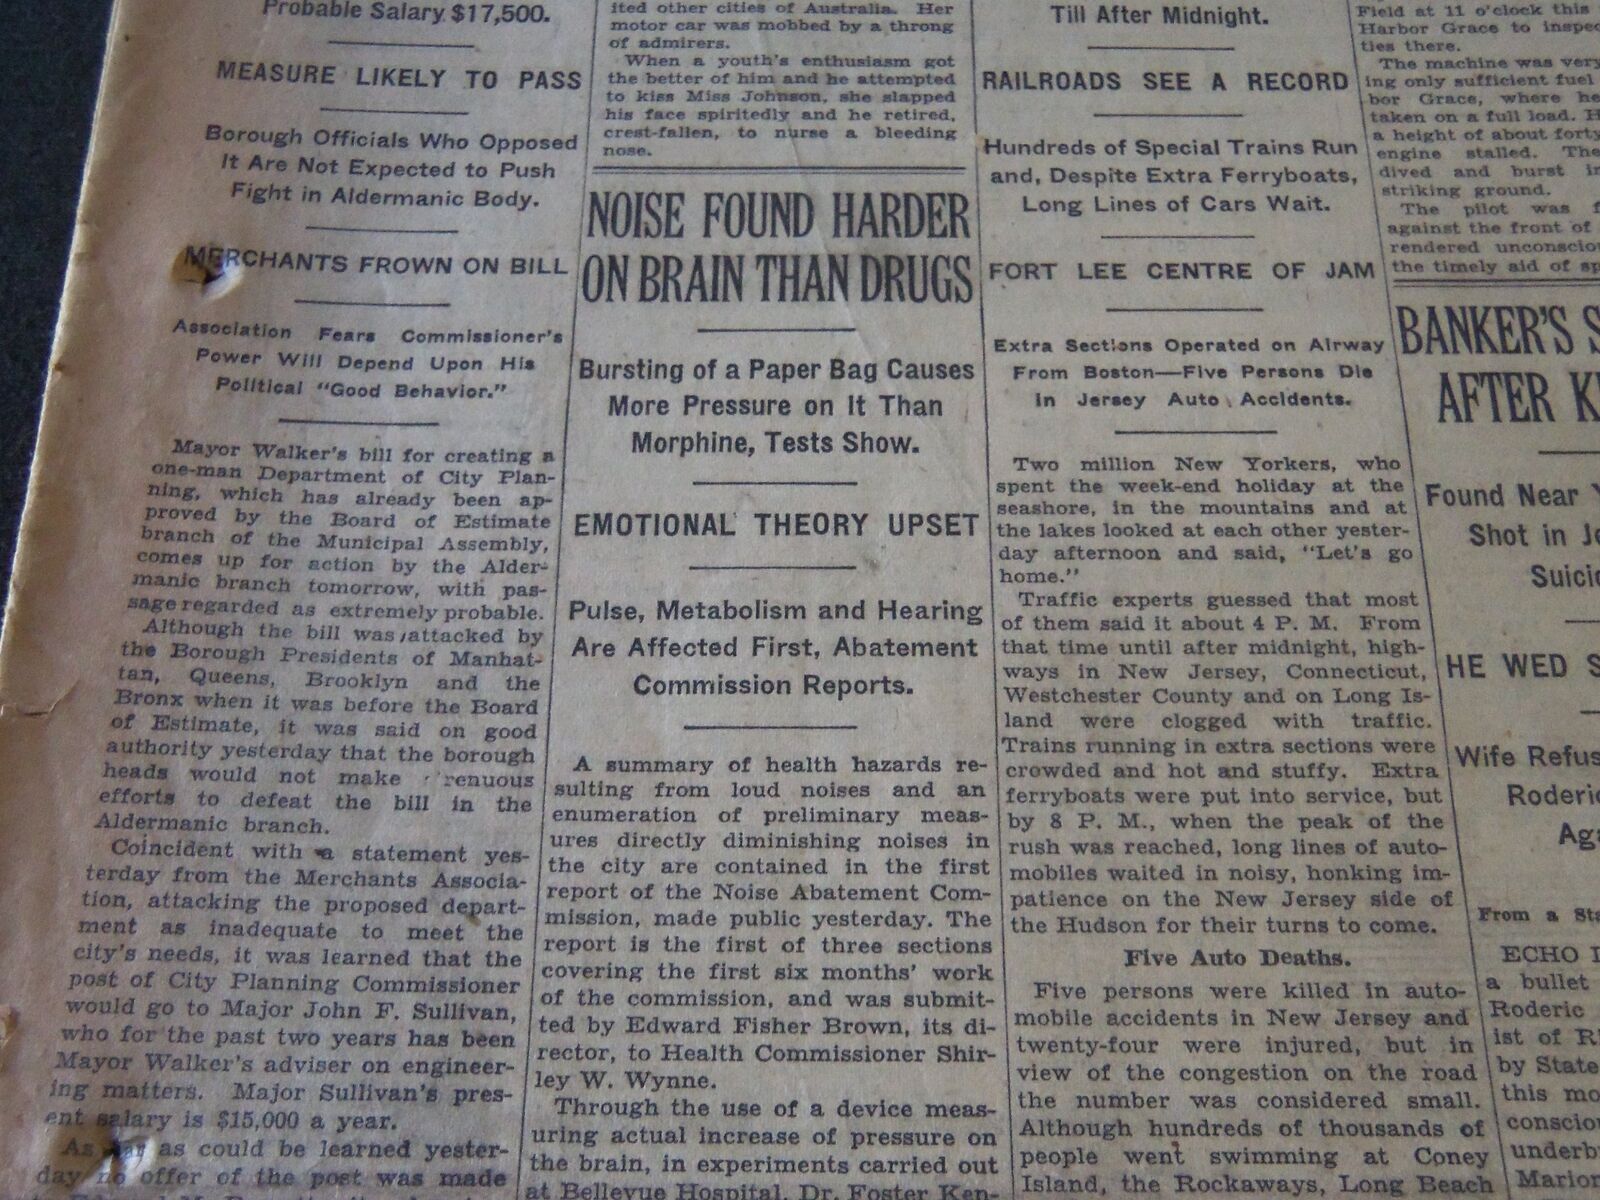 1930 JULY 7 NEW YORK TIMES - NOISE HARDER ON BRAIN THAN DRUGS - NT 6344